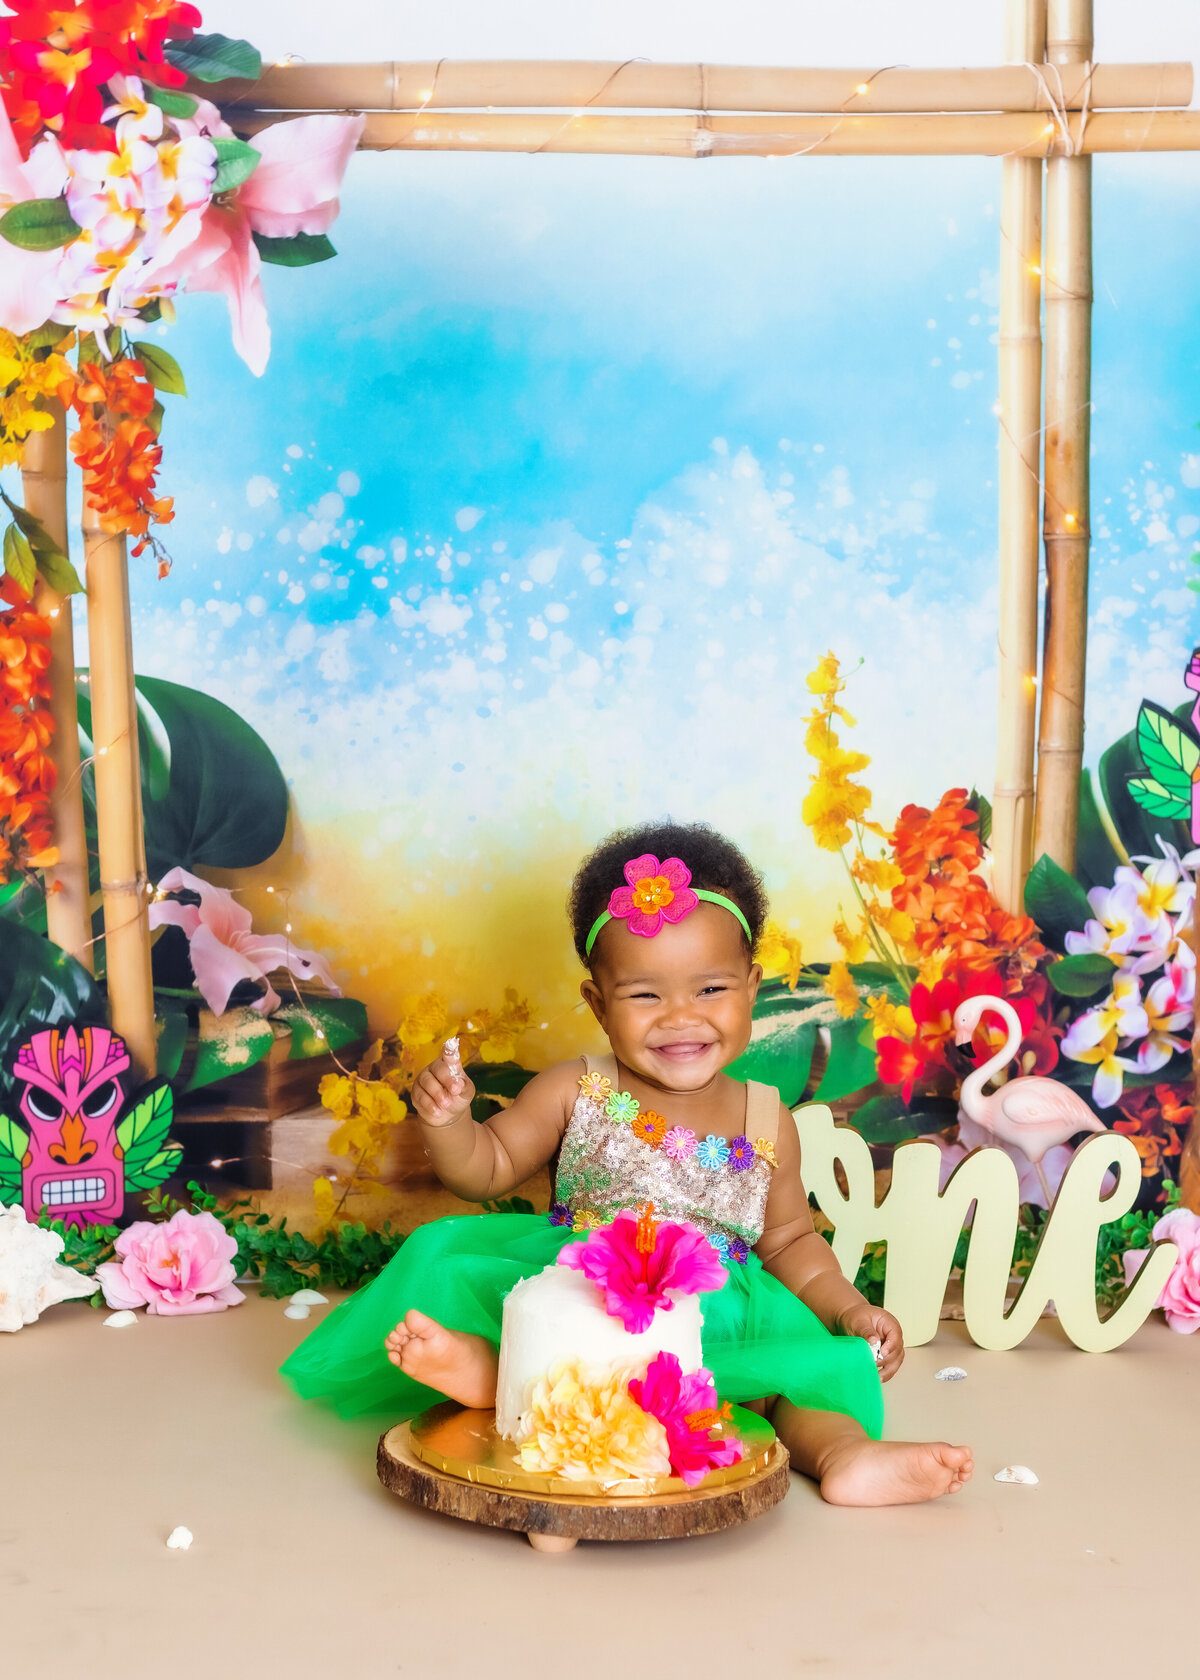 Cake Smash Photographer, a one year old baby sits before a floral cake in a floral dress and tropical background